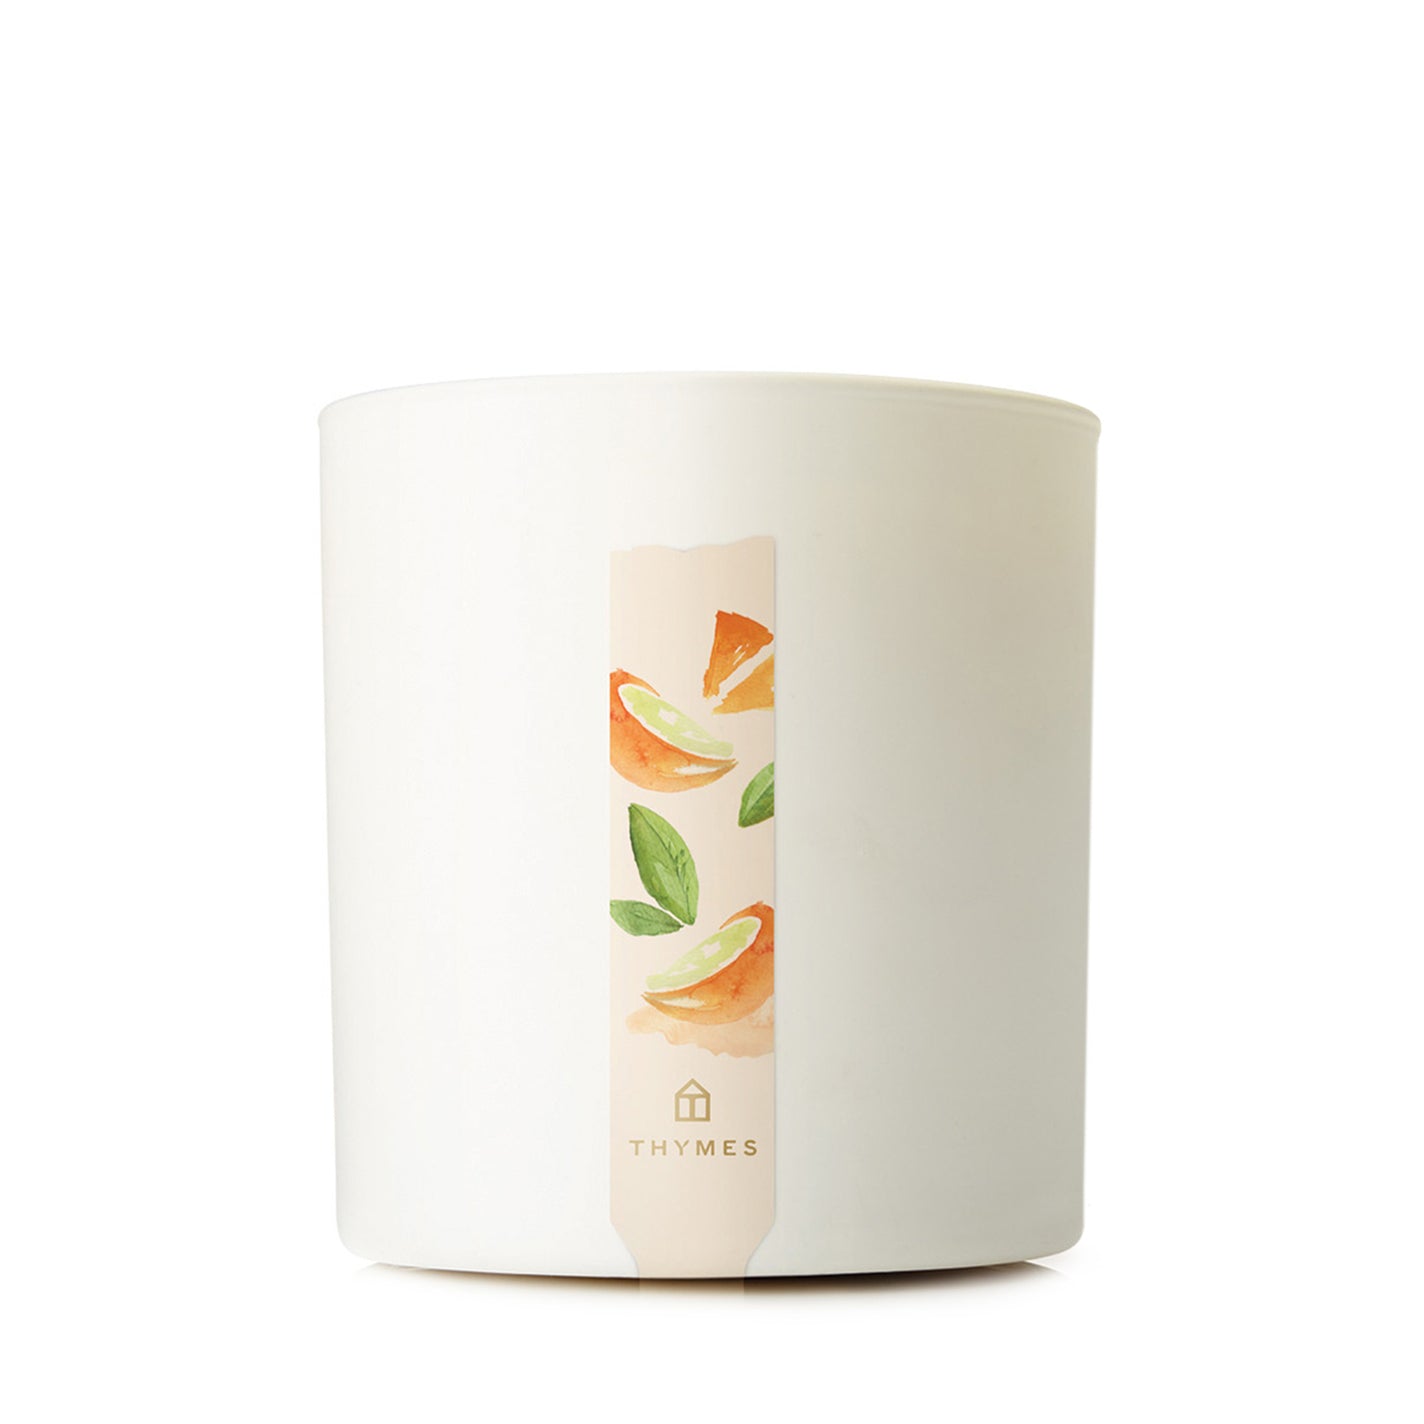 Thymes Mandarin Coriander Boxed Candle